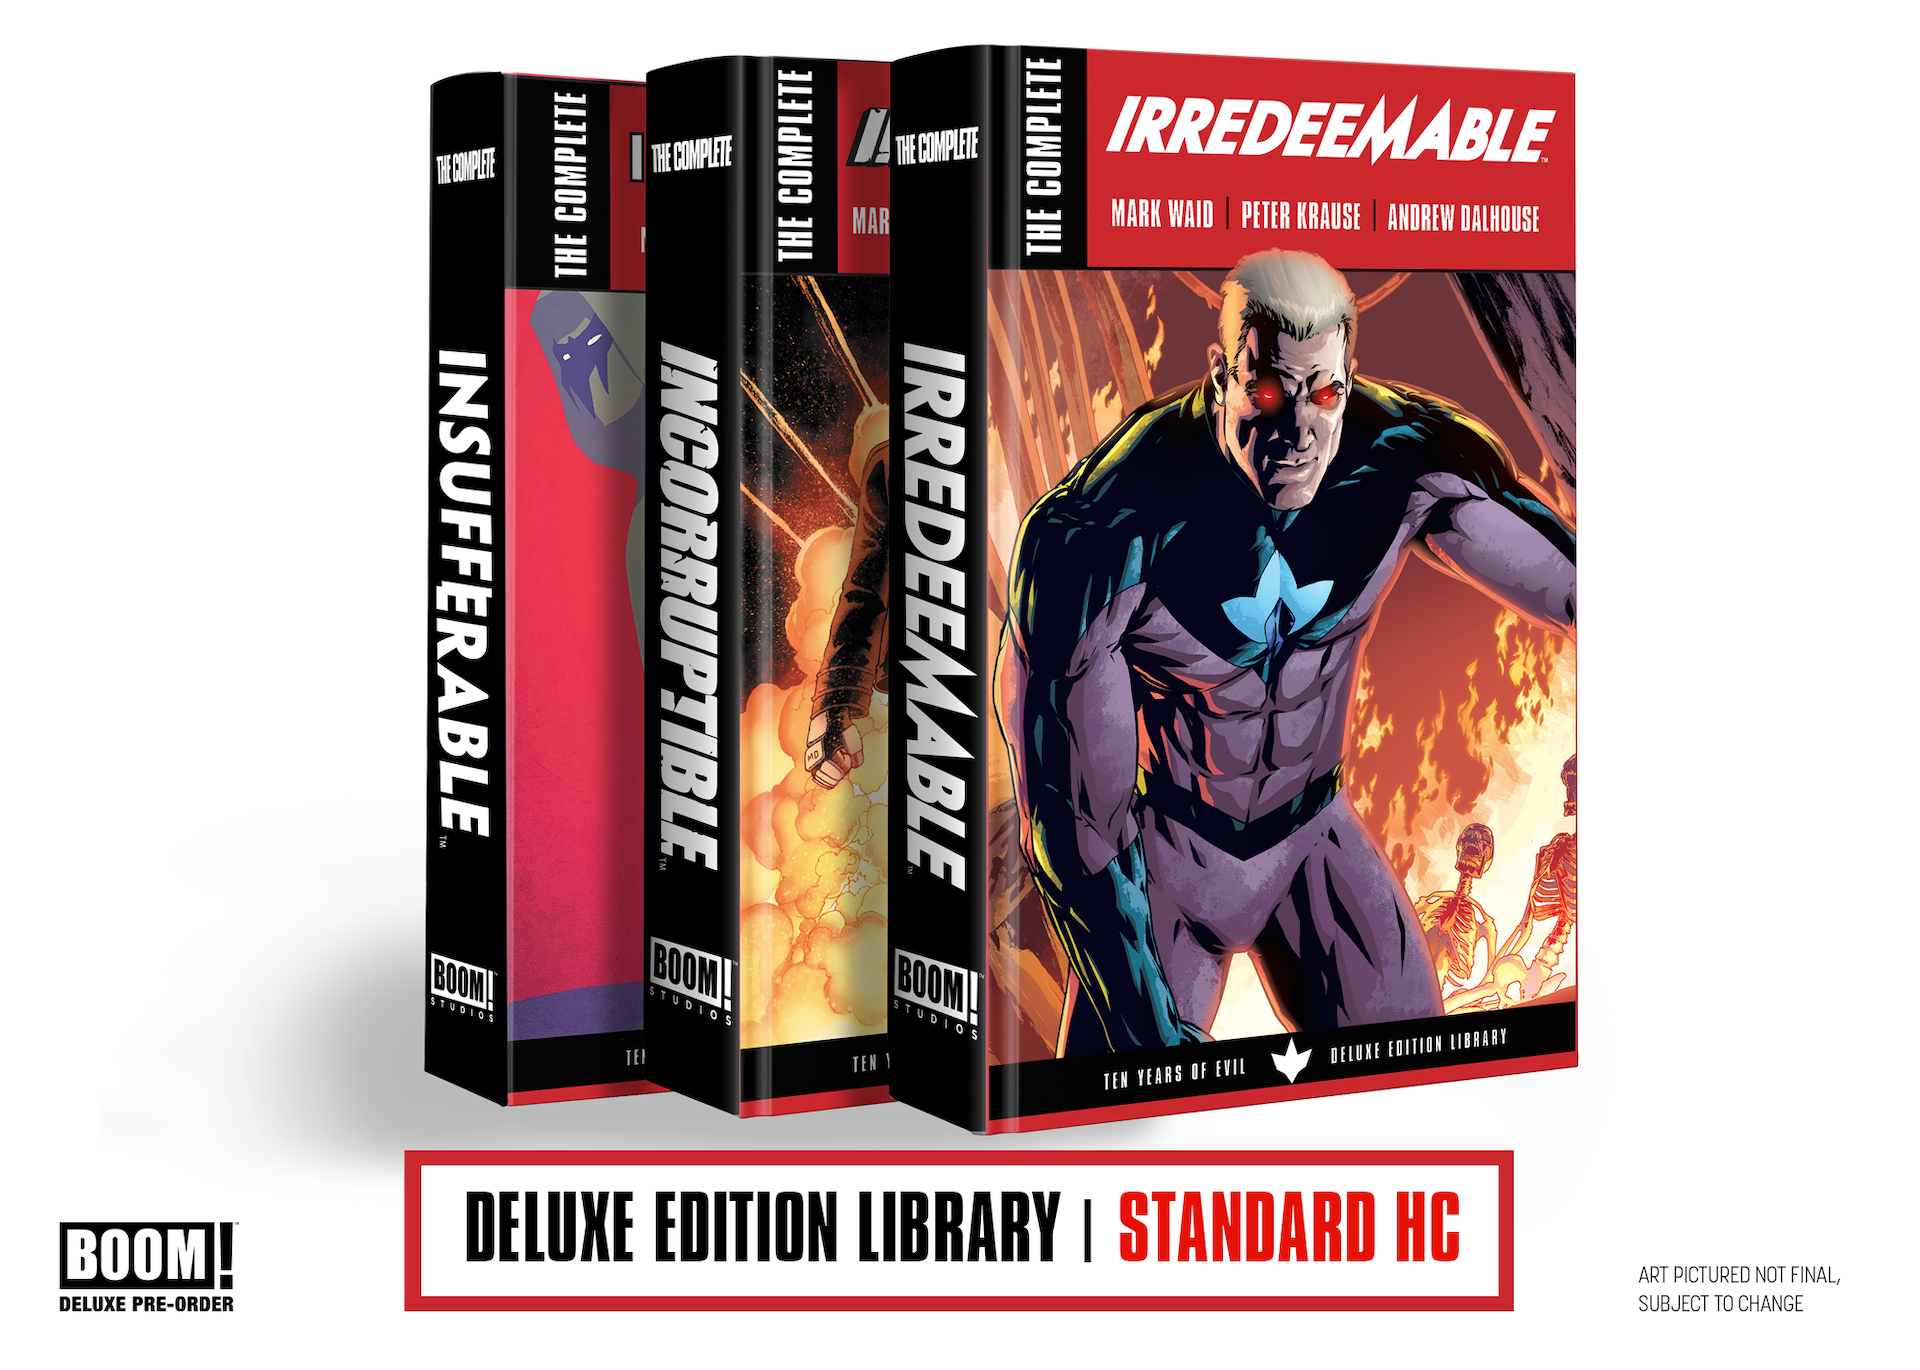 BOOM! Studios launches 'The Complete Irredeemable' on Kickstarter